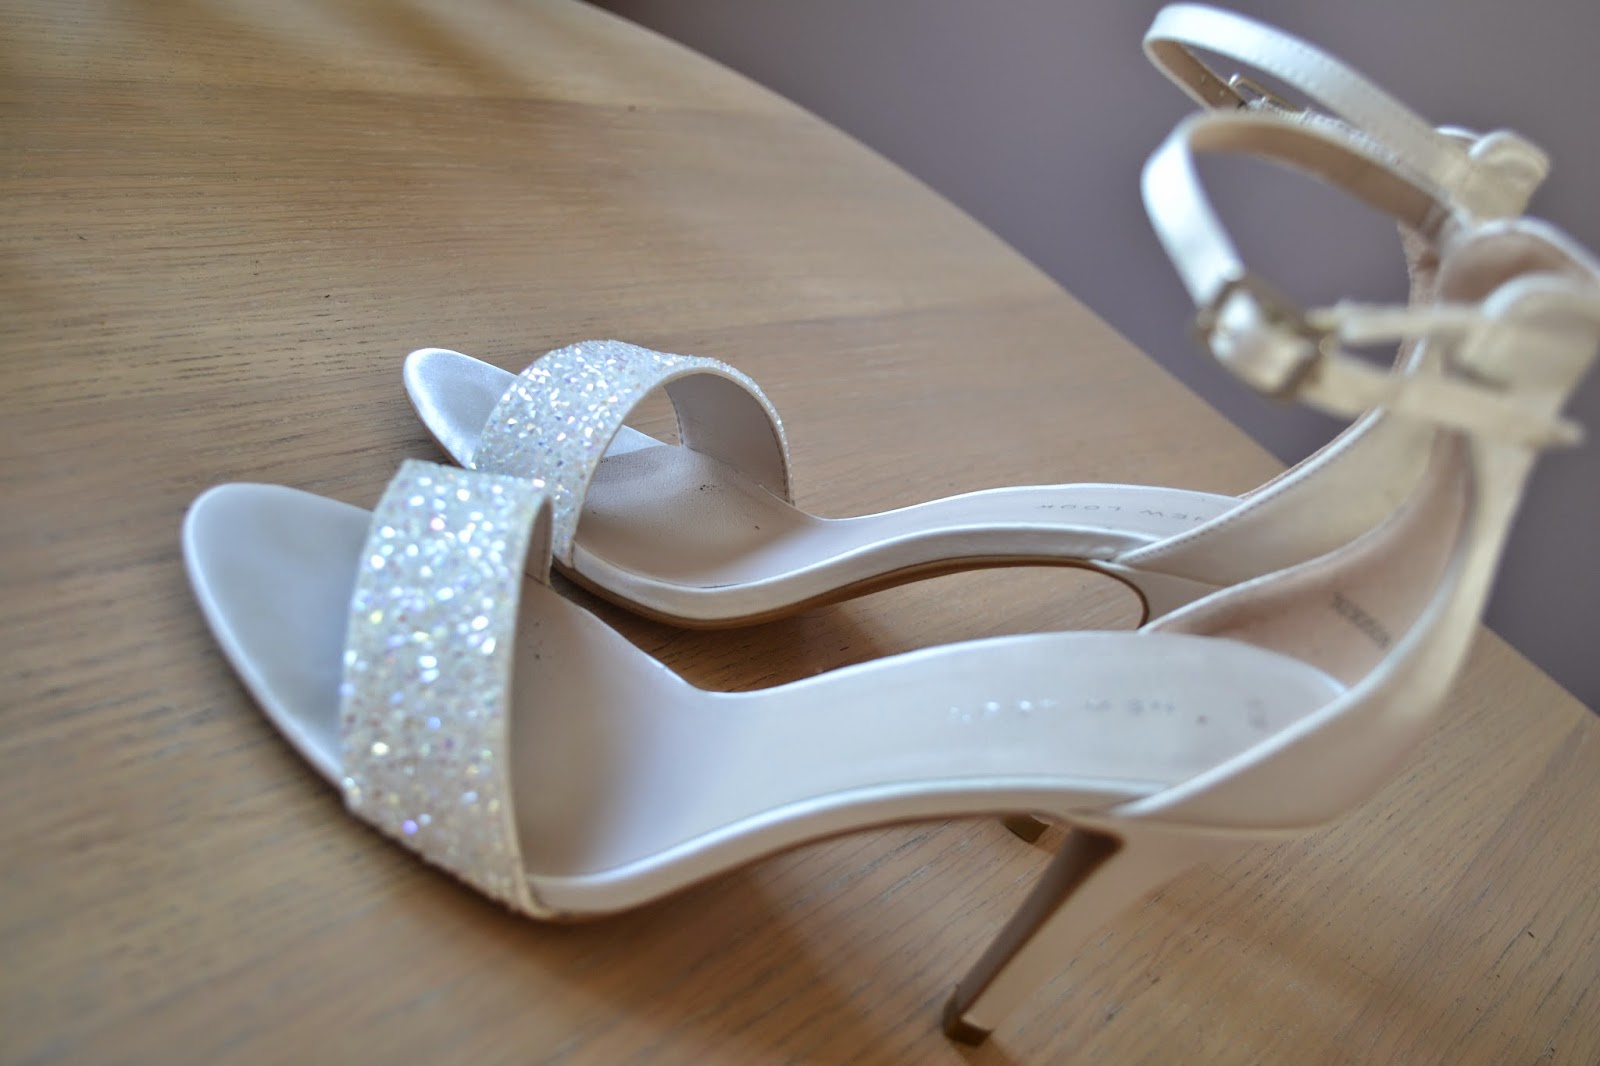 bridal shoes new look